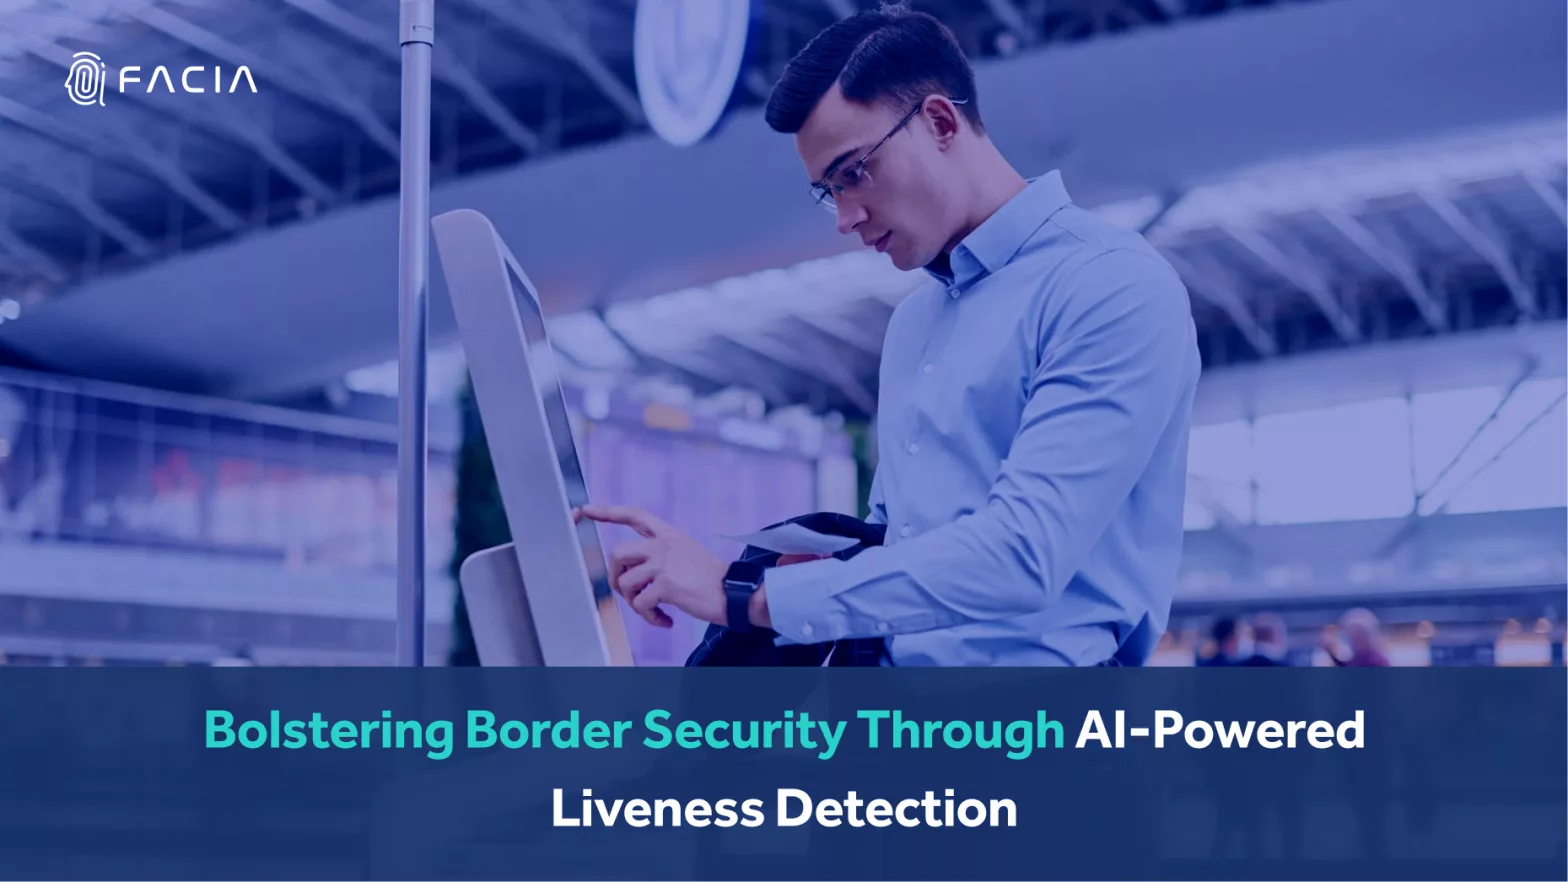 The infographic shows the EU’s Frontex Face ID Check procedure via Automated Border Control Gate Technology to streamline the identification of travelers at border crossings.